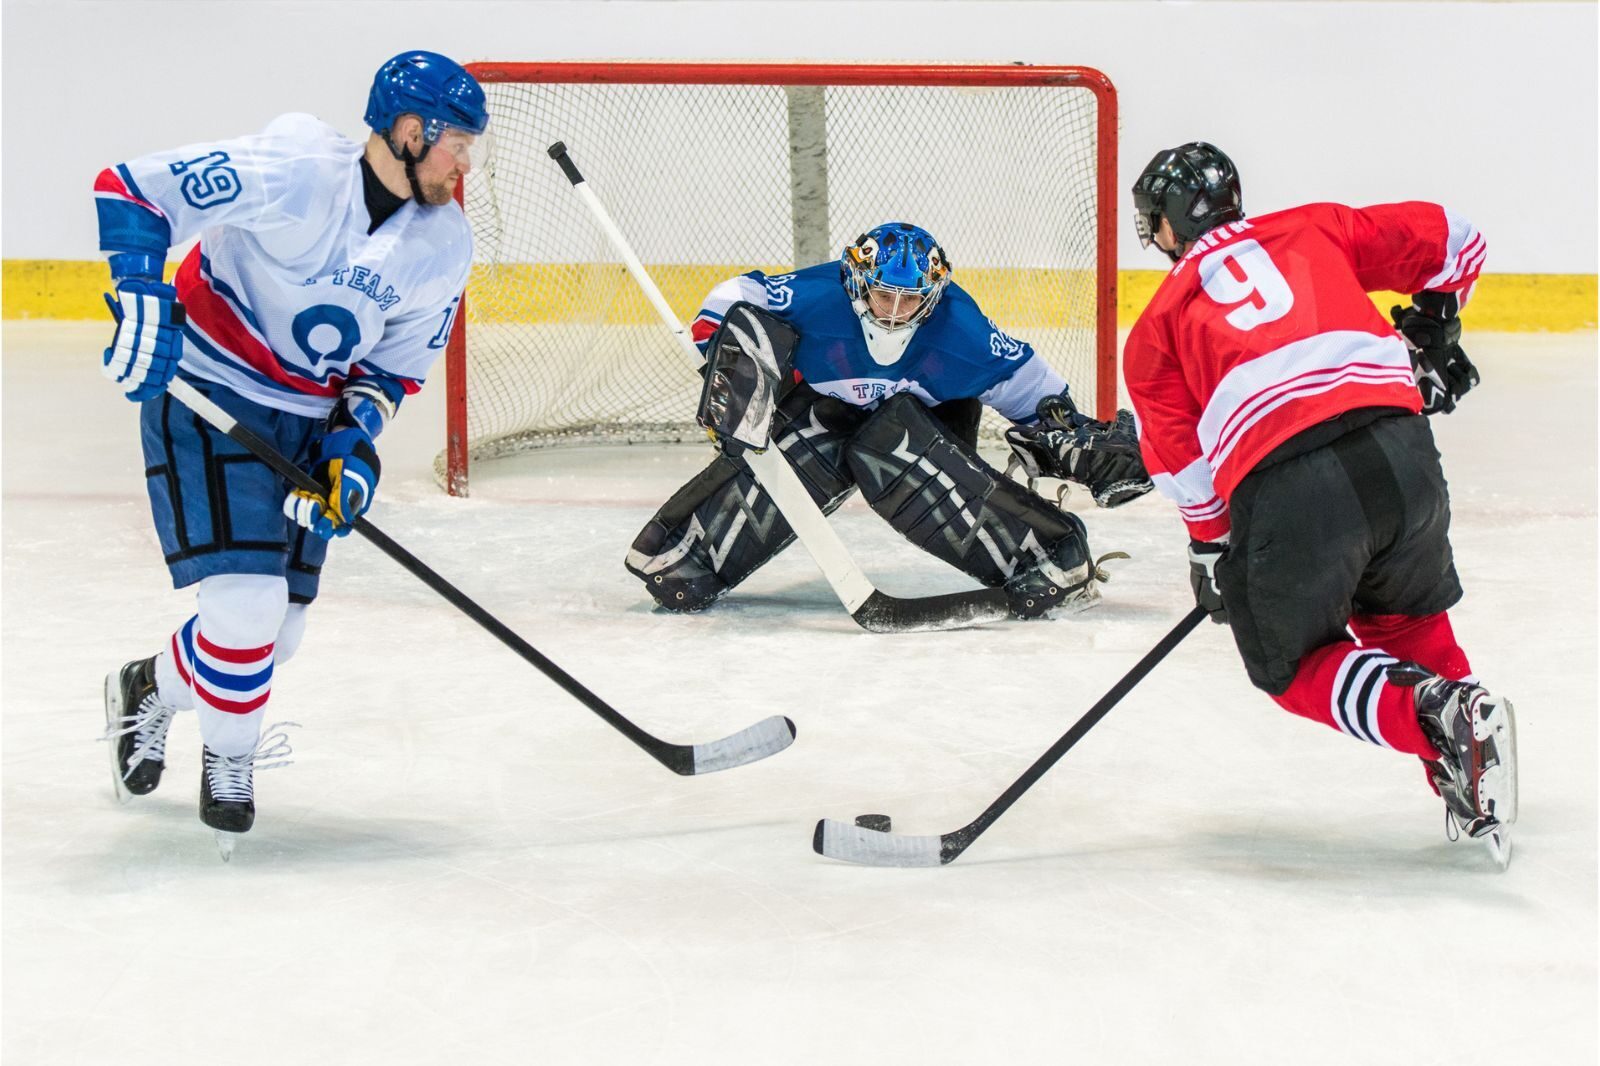 Coaches who use a data-driven hockey software get better insights to make decisions.